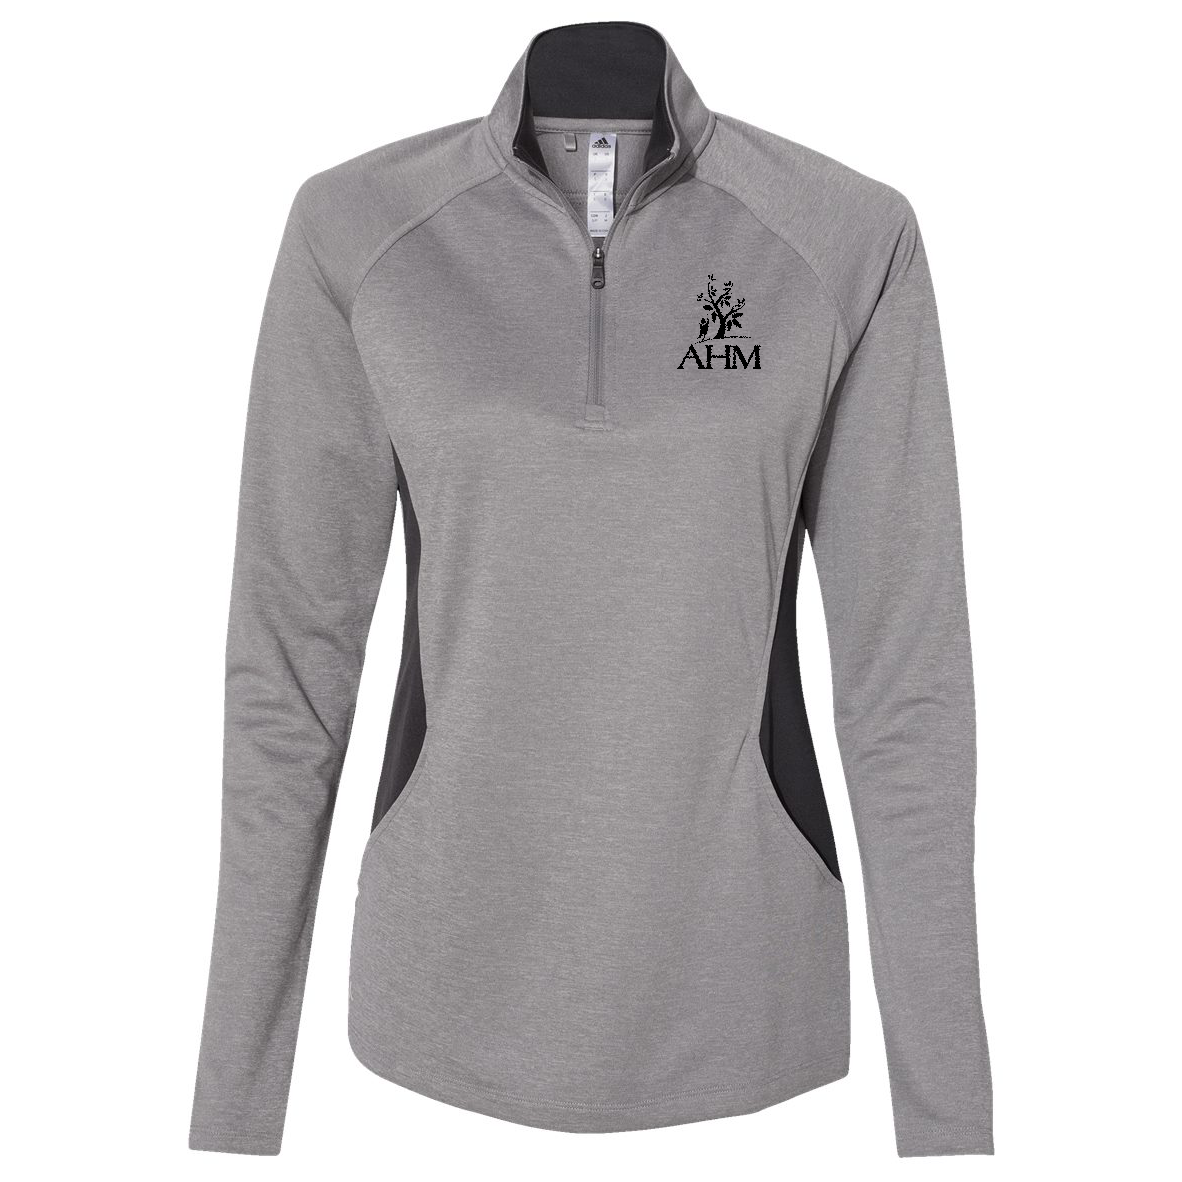 AHM Youth & Family Services Adidas Women's Lightweight Quarter-Zip Pullover